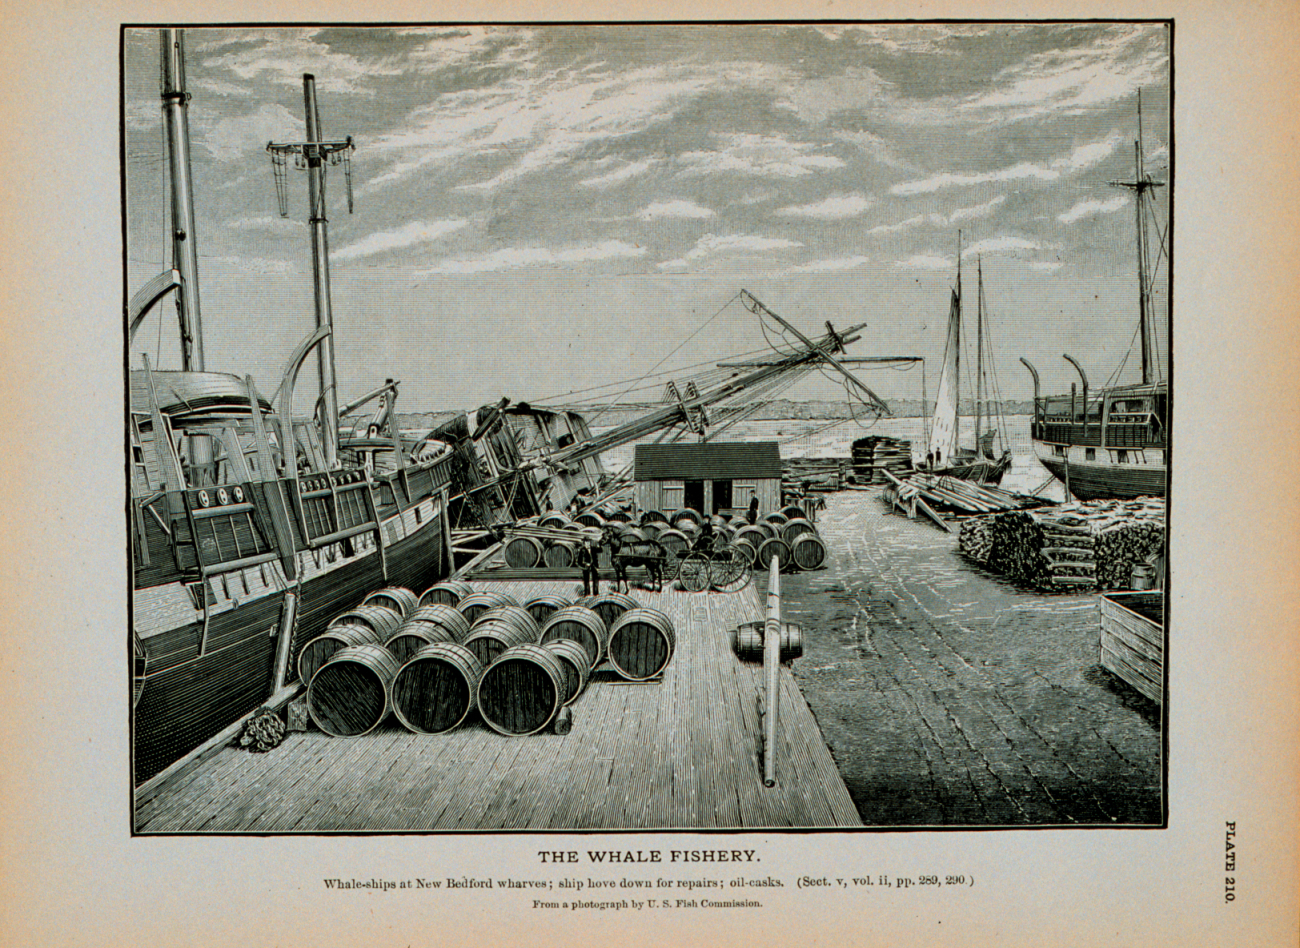 Whale ships at New Bedford wharf; ship hove down for repairs; oil-casksFrom photograph by U